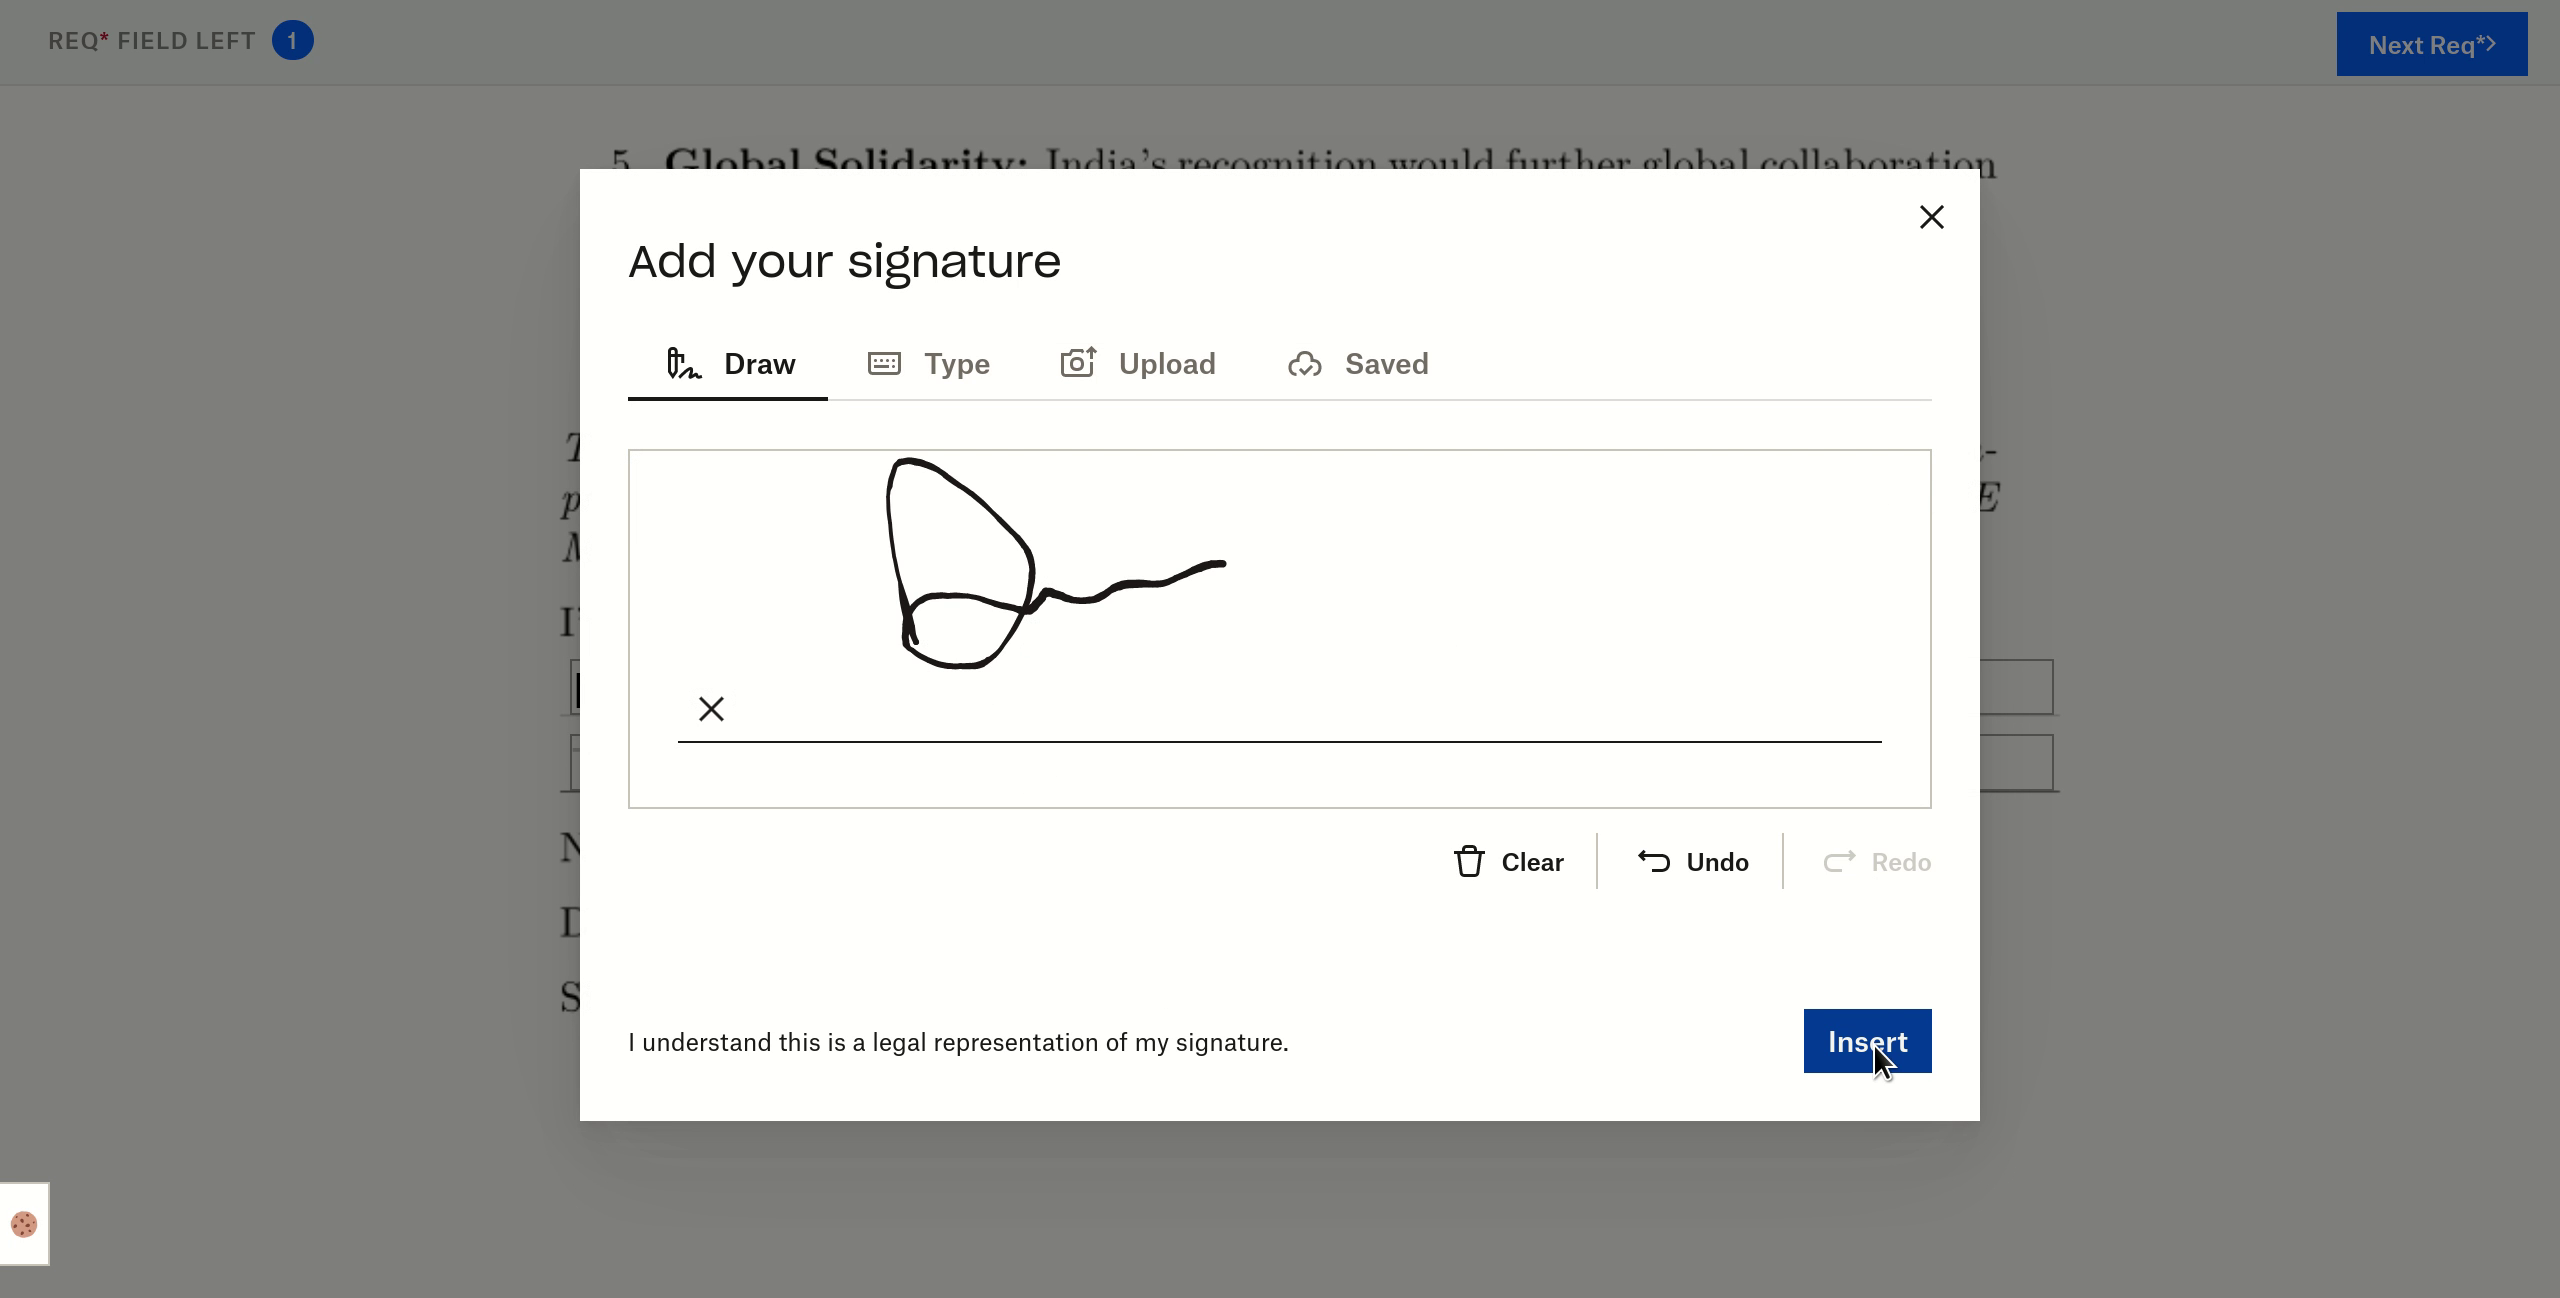 Signee can sign in real-time